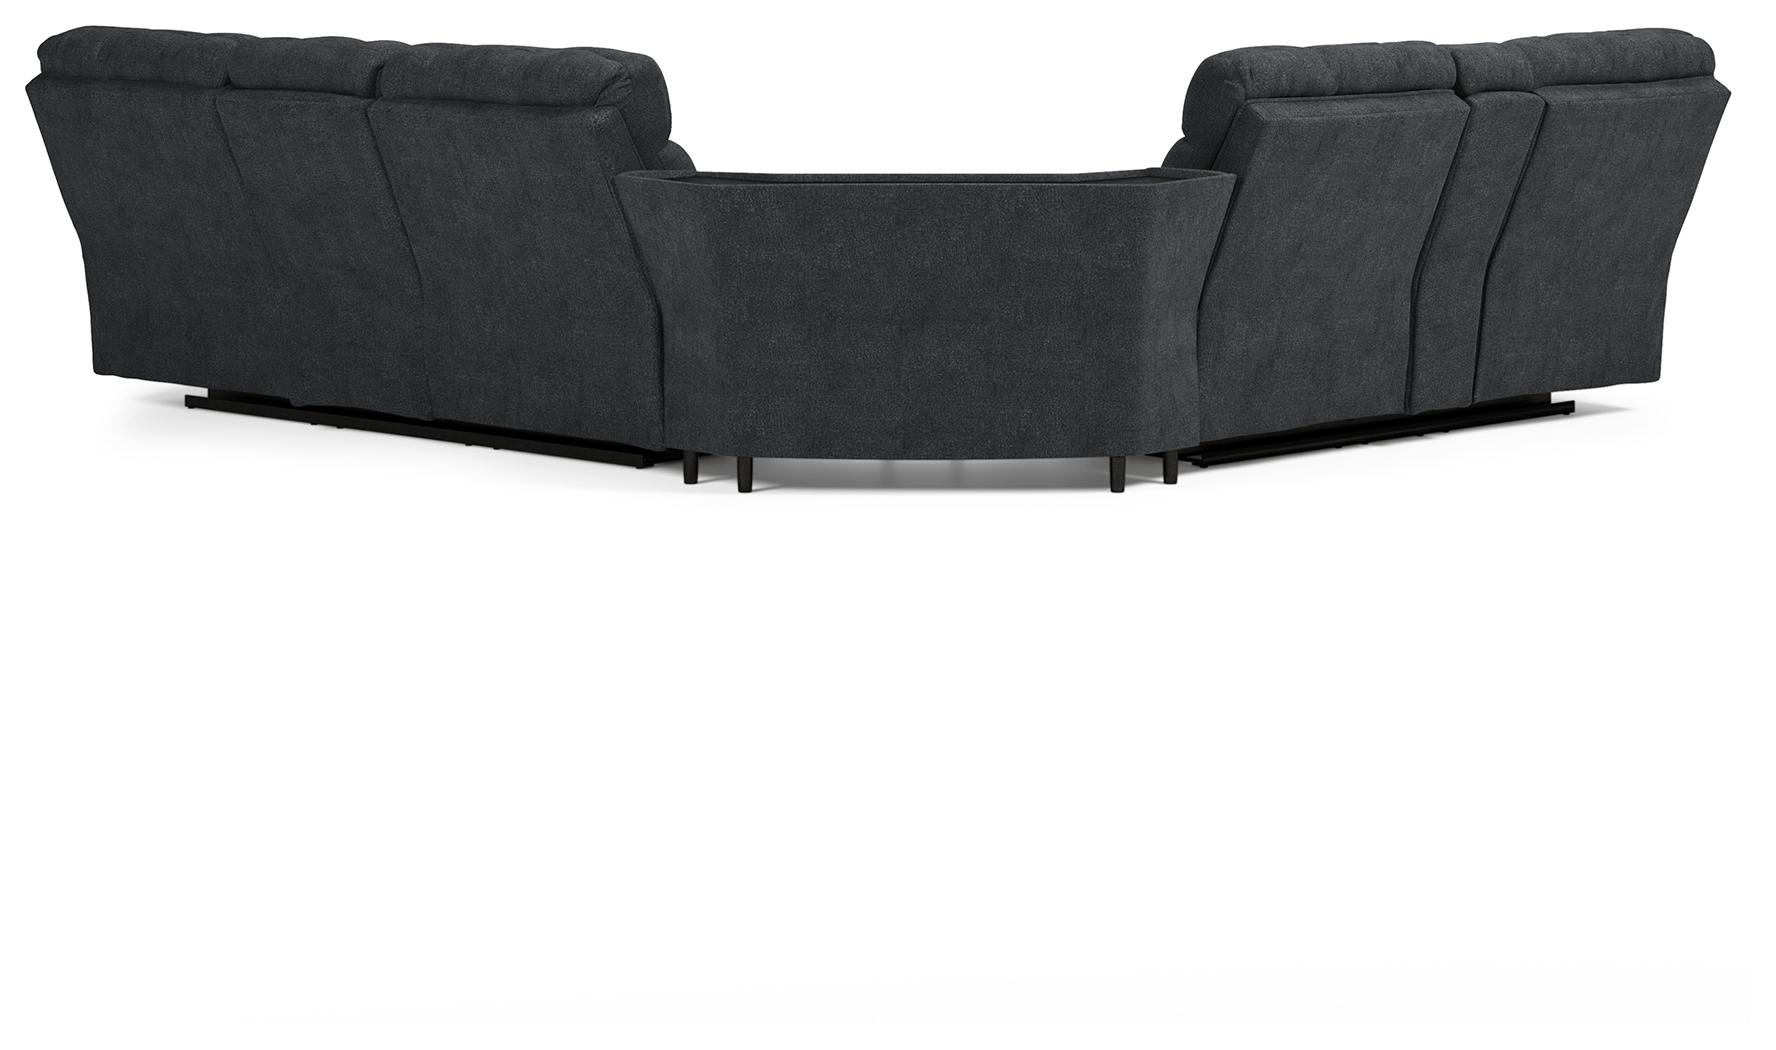 ASHLEY FURNITURE 55403S1 Wilhurst 3-piece Reclining Sectional